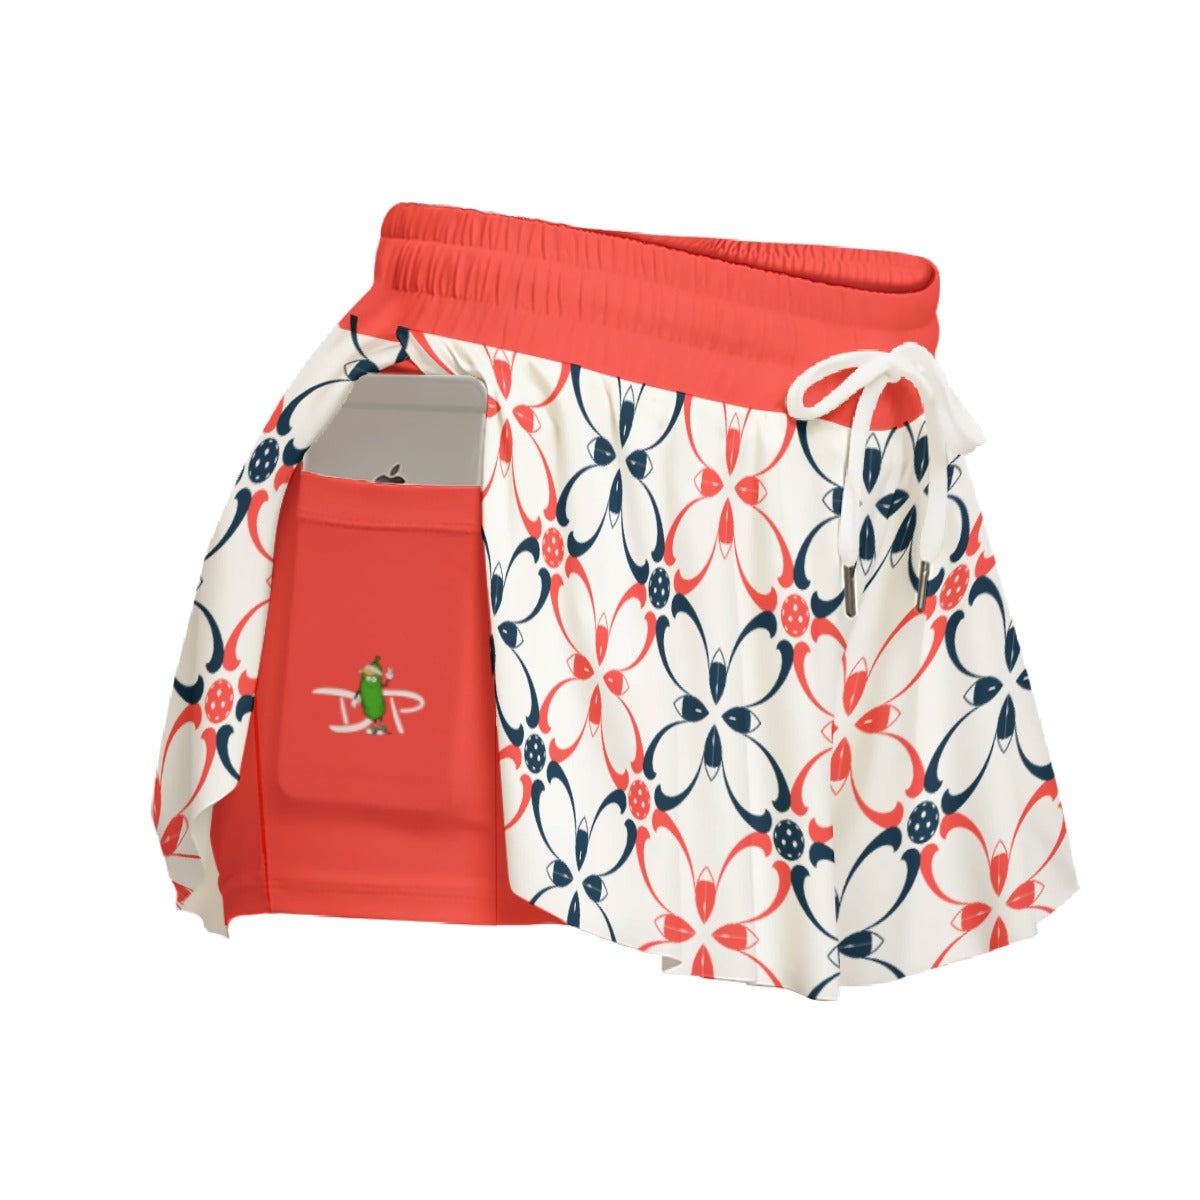 Van - White/Coral - Petals - Pickleball Women's Sport Culottes with Pockets by Dizzy Pickle